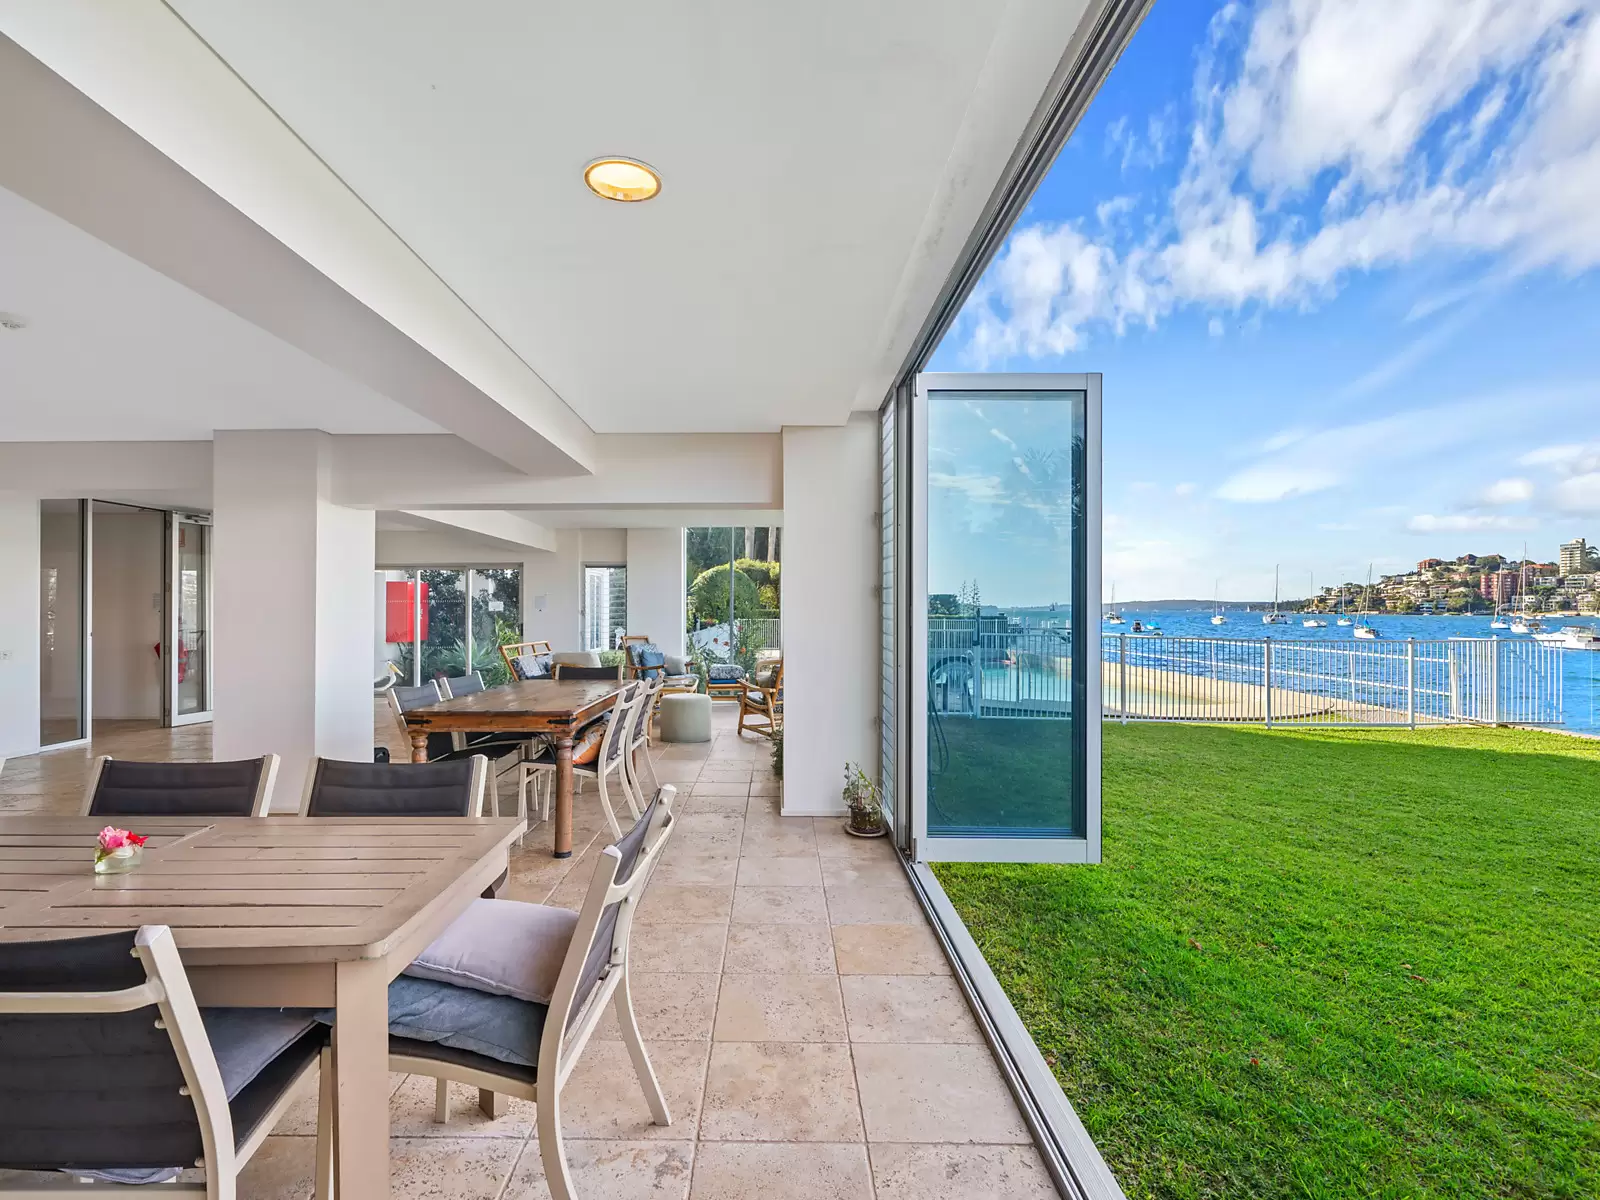 Photo #17: 35/35A Sutherland Crescent, Darling Point - Sold by Sydney Sotheby's International Realty